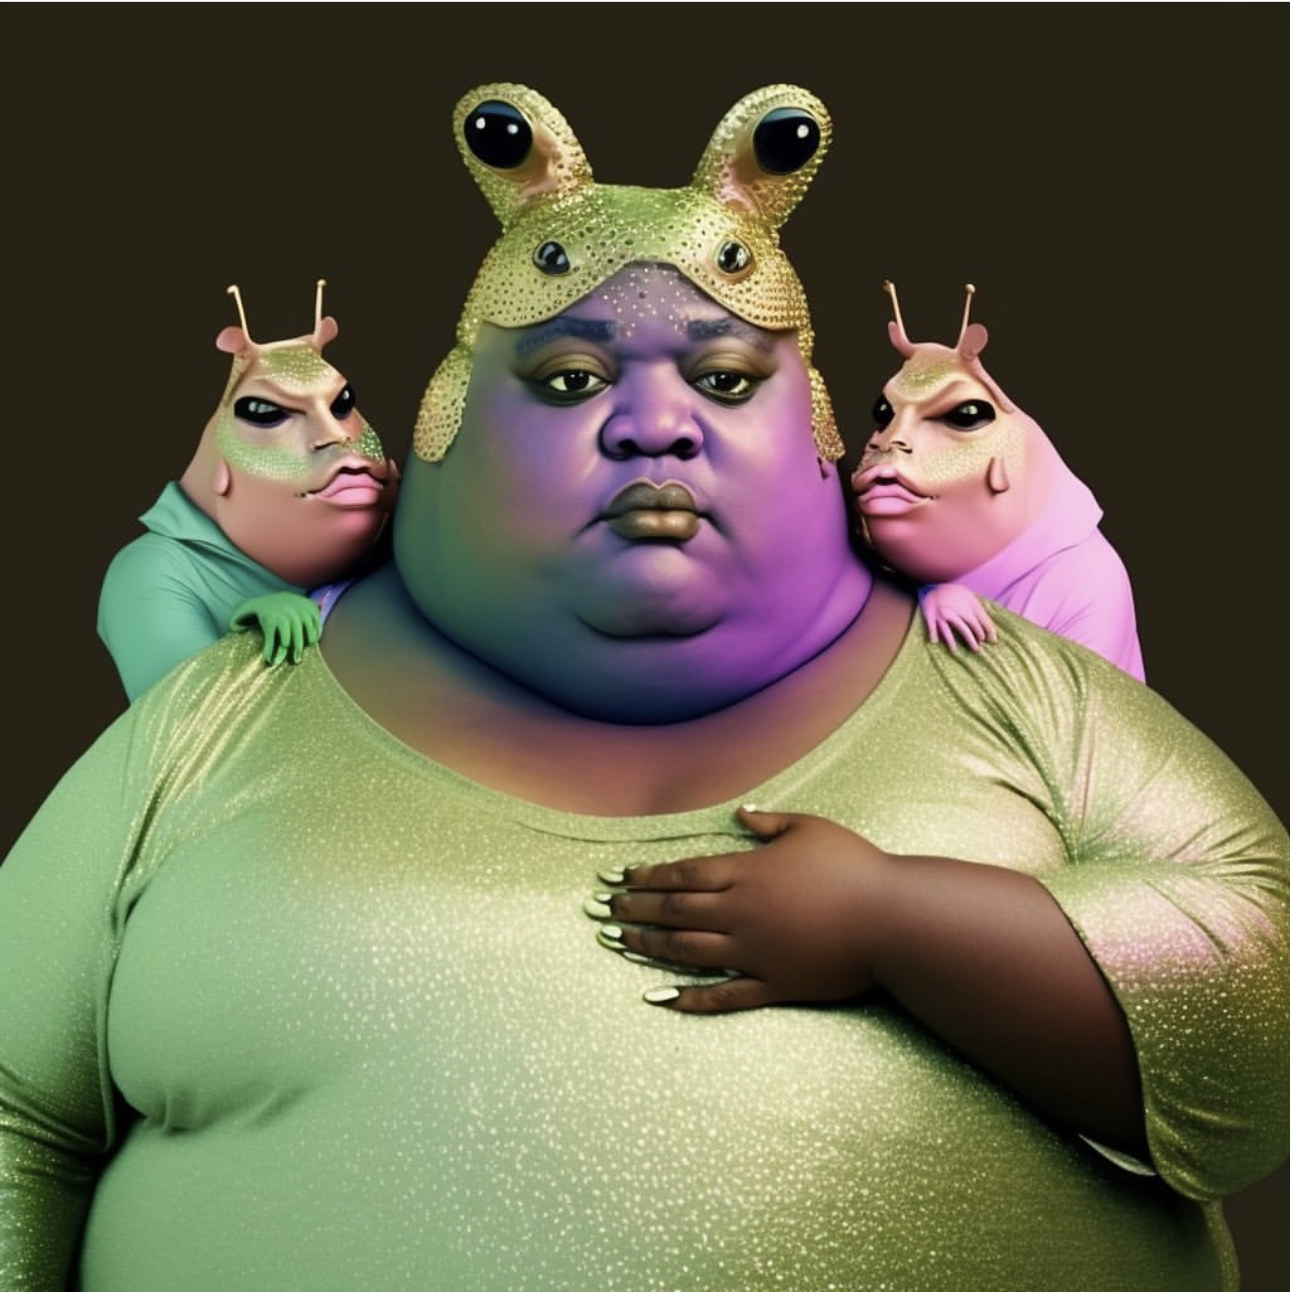 Fat Black woman with a frog-like headdress and alien creatures on each shoulder